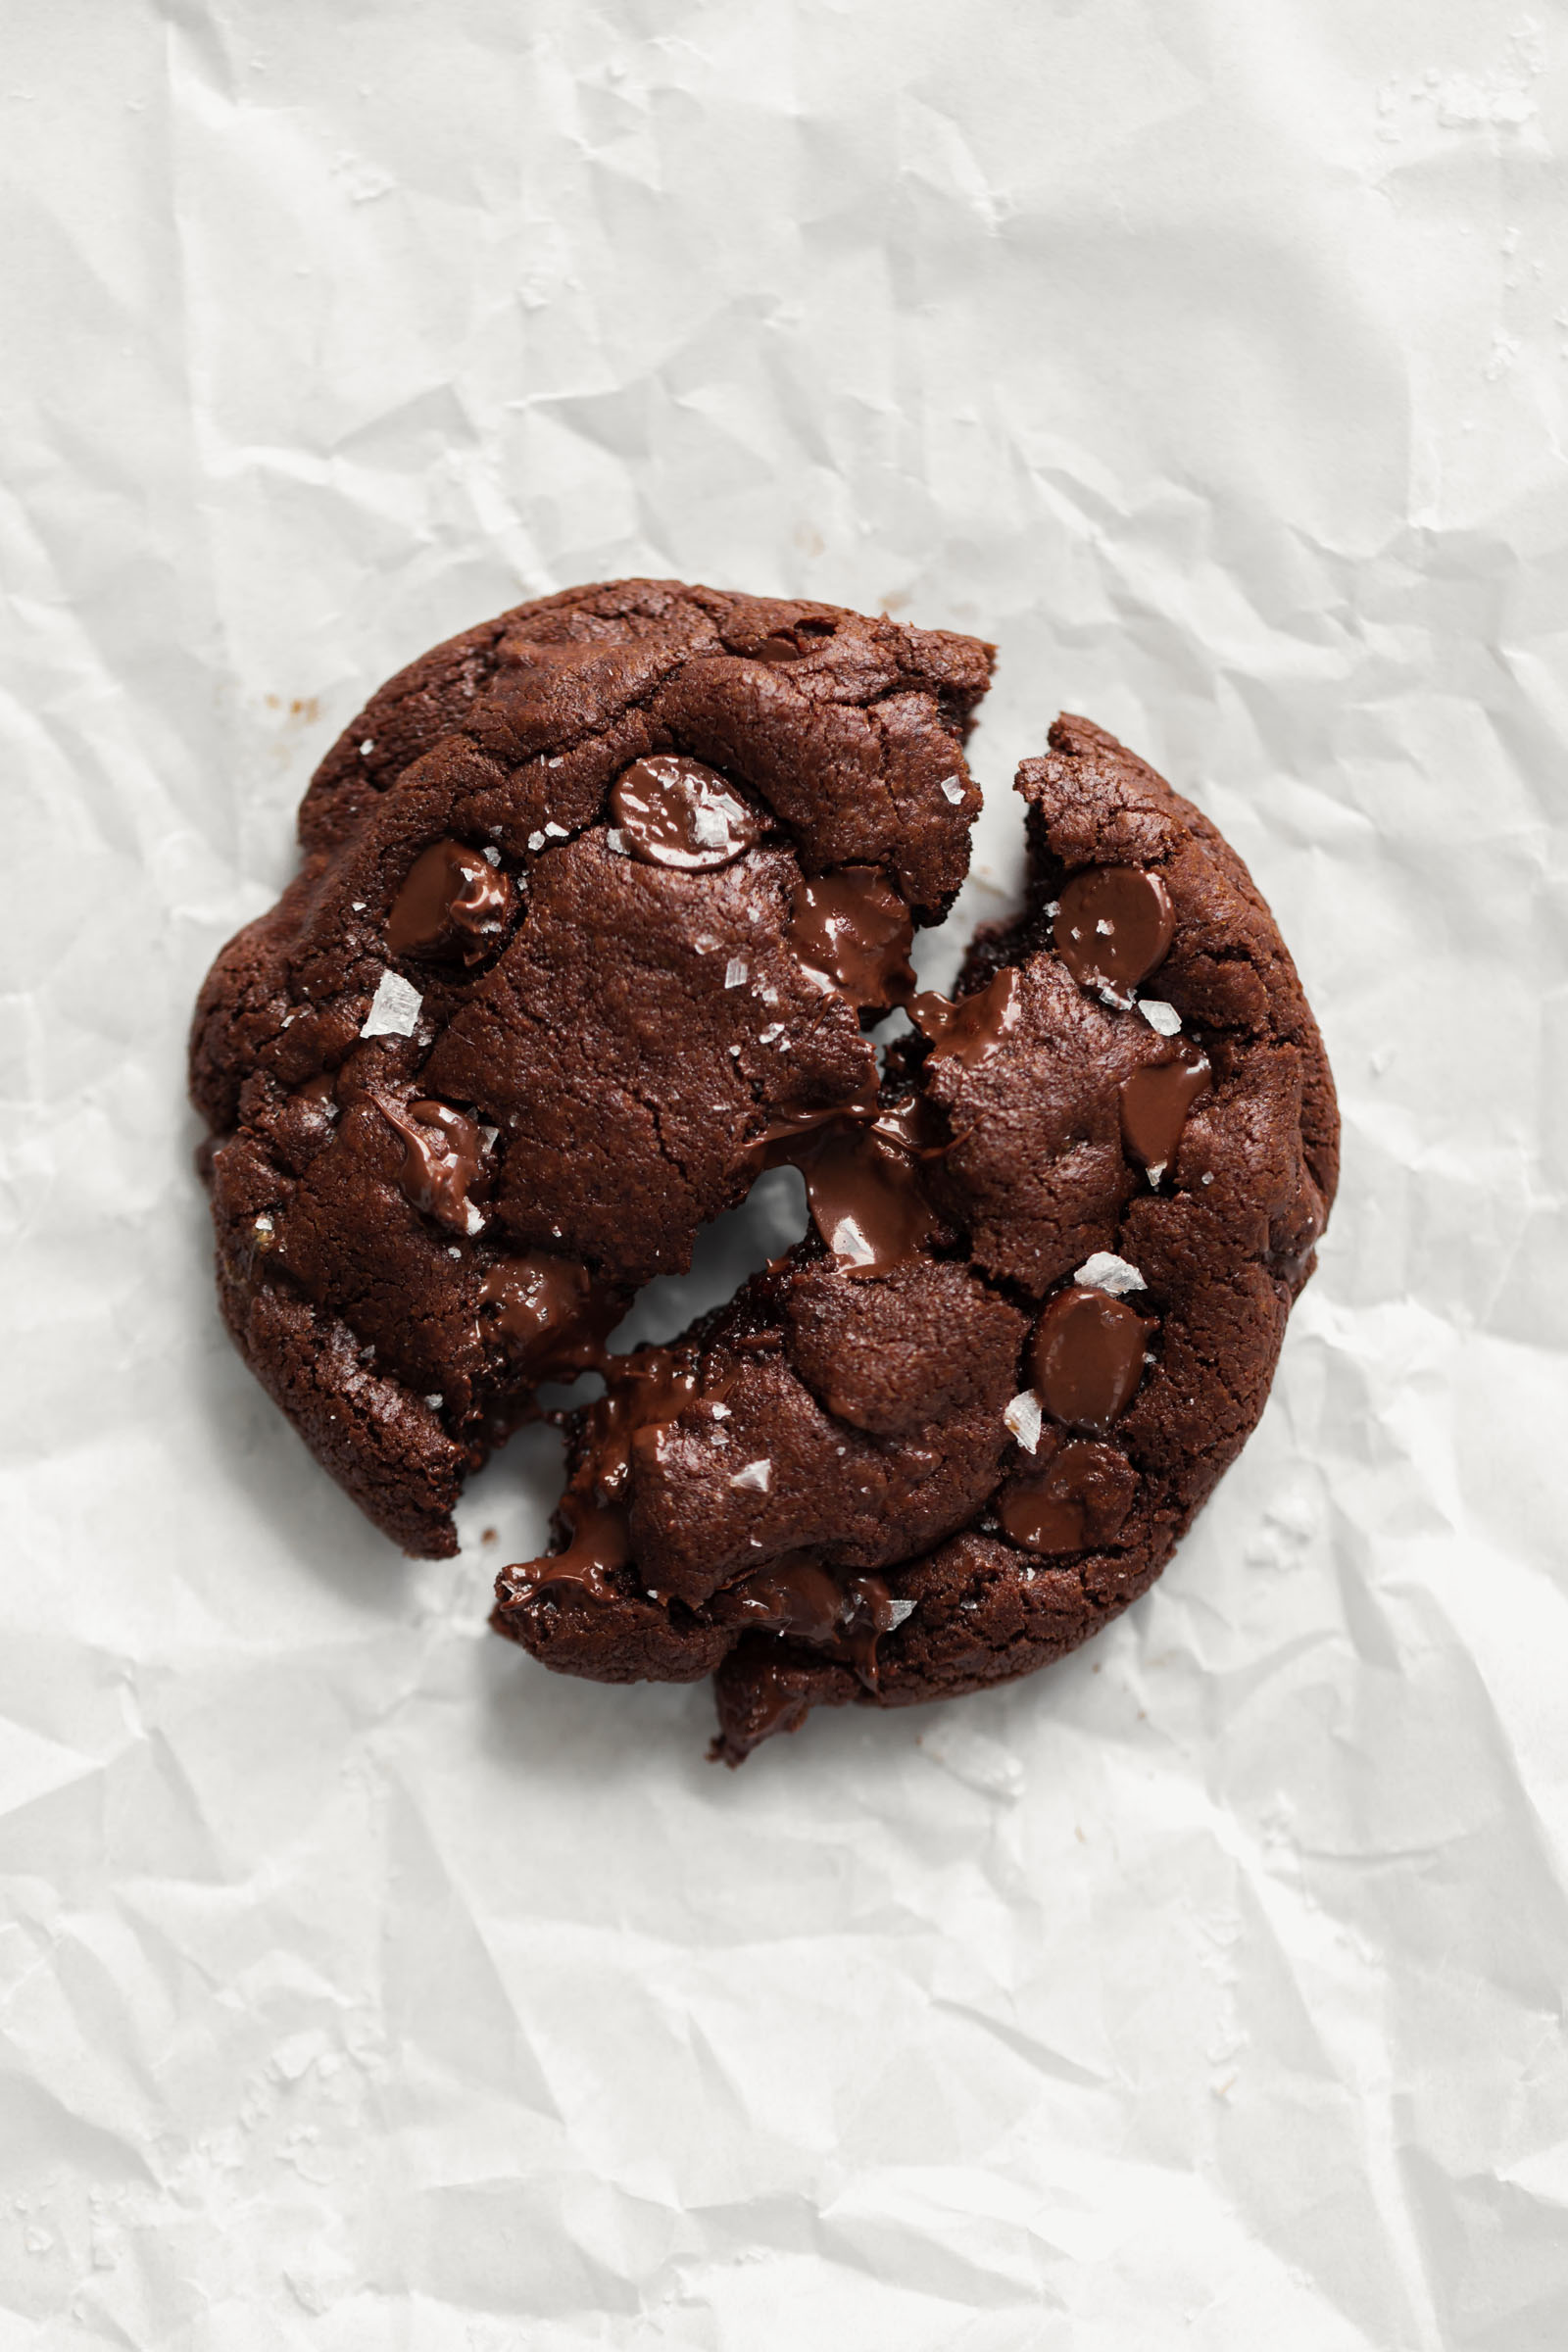 https://bromabakery.com/wp-content/uploads/2022/05/Single-Serve-Double-Chocolate-Chip-Cookie-3.jpg